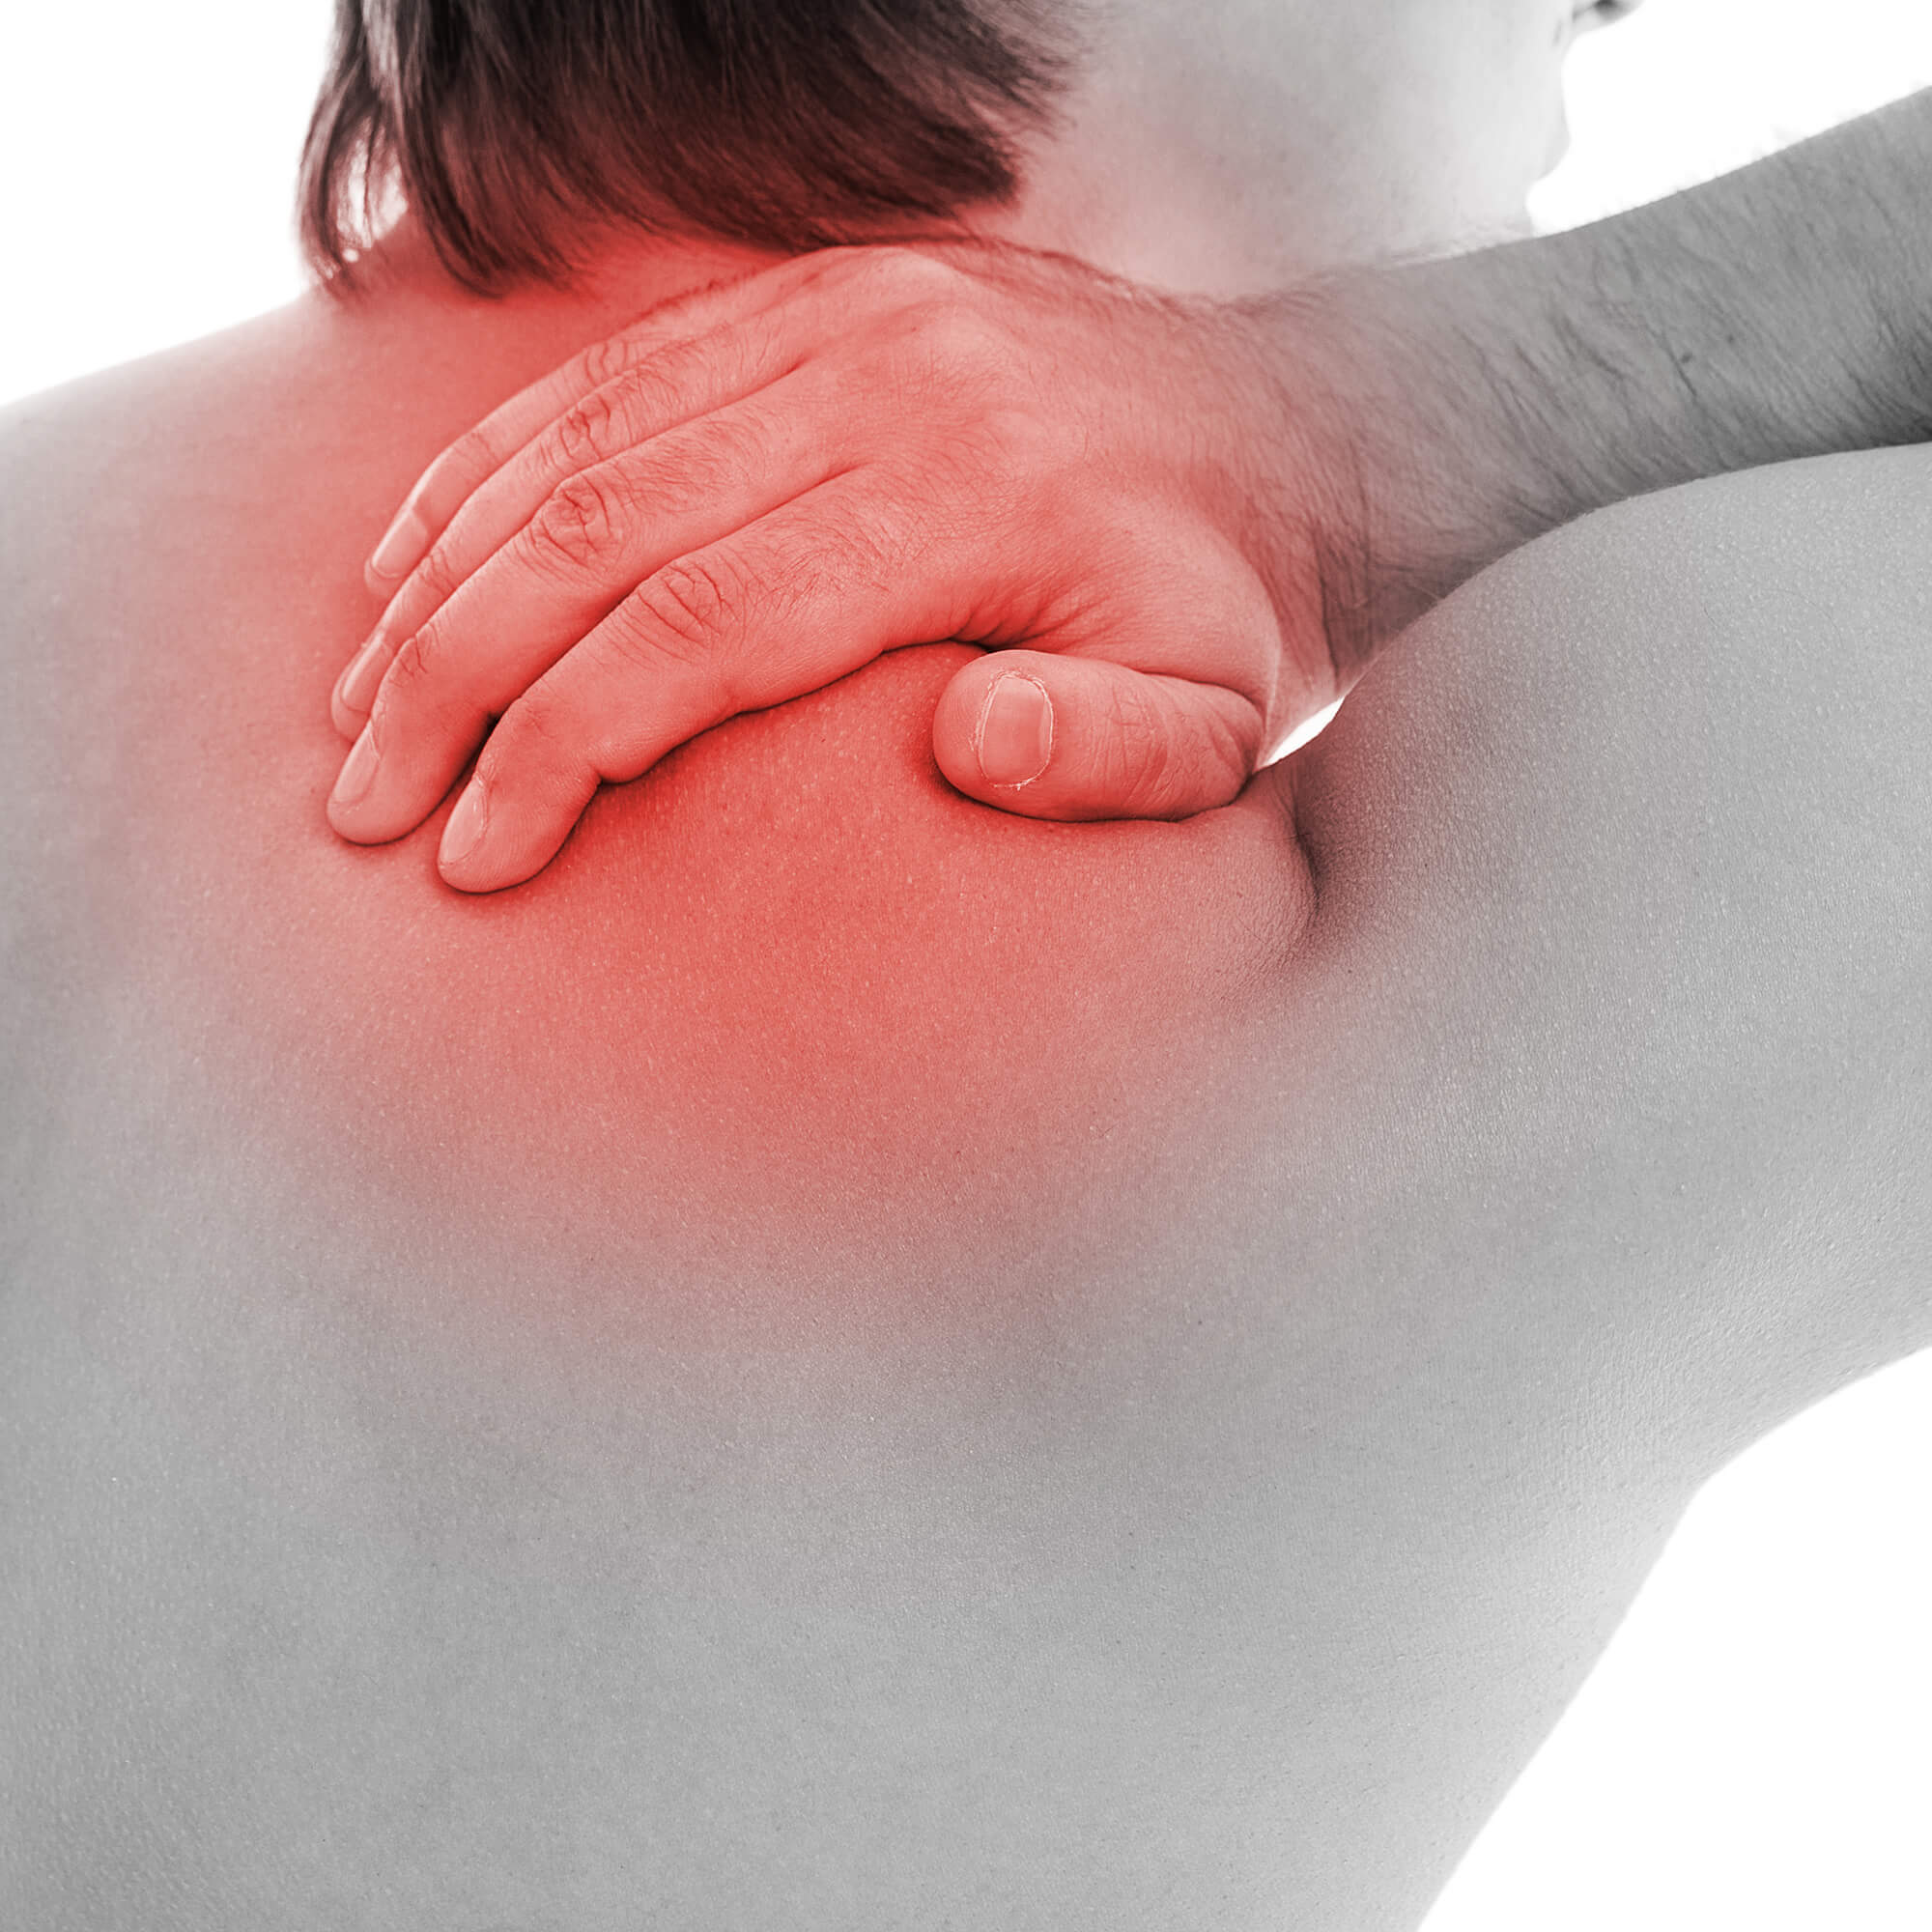 Acute vs. Chronic Rotator Cuff Tear: What’s the Difference?